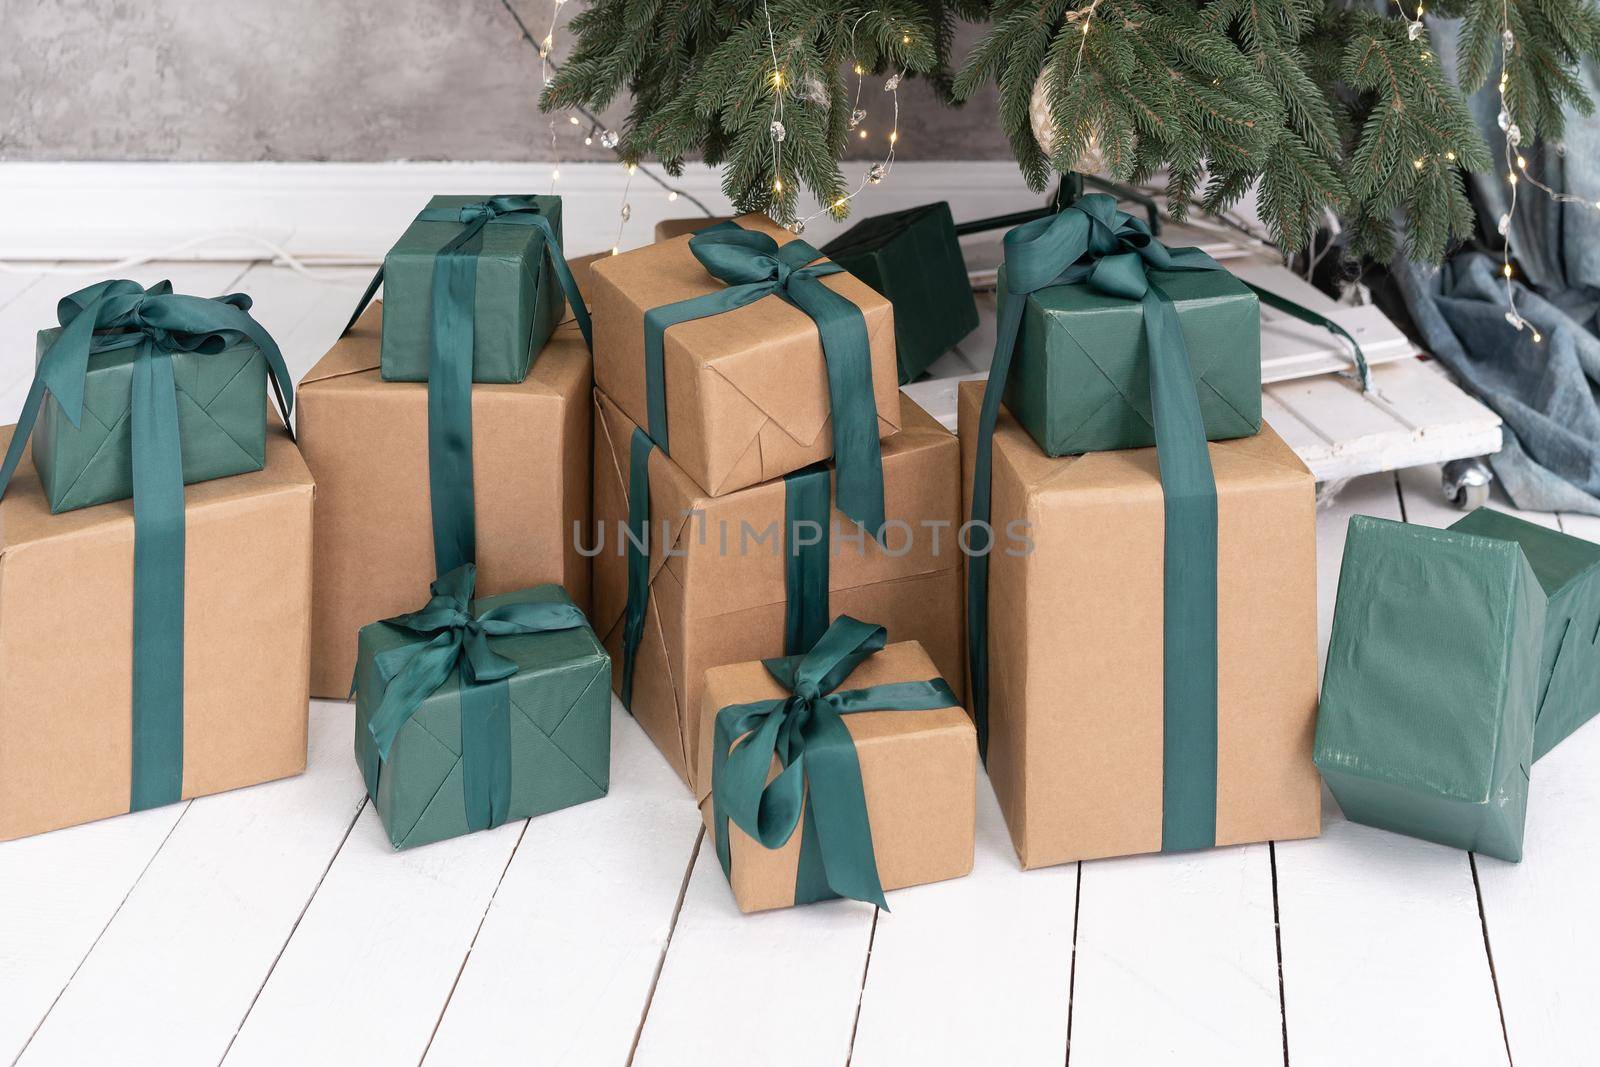 New Year gifts under Christmas tree. Boxes packed in craft and green paper at white floor. Atmosphere of festive surprise.